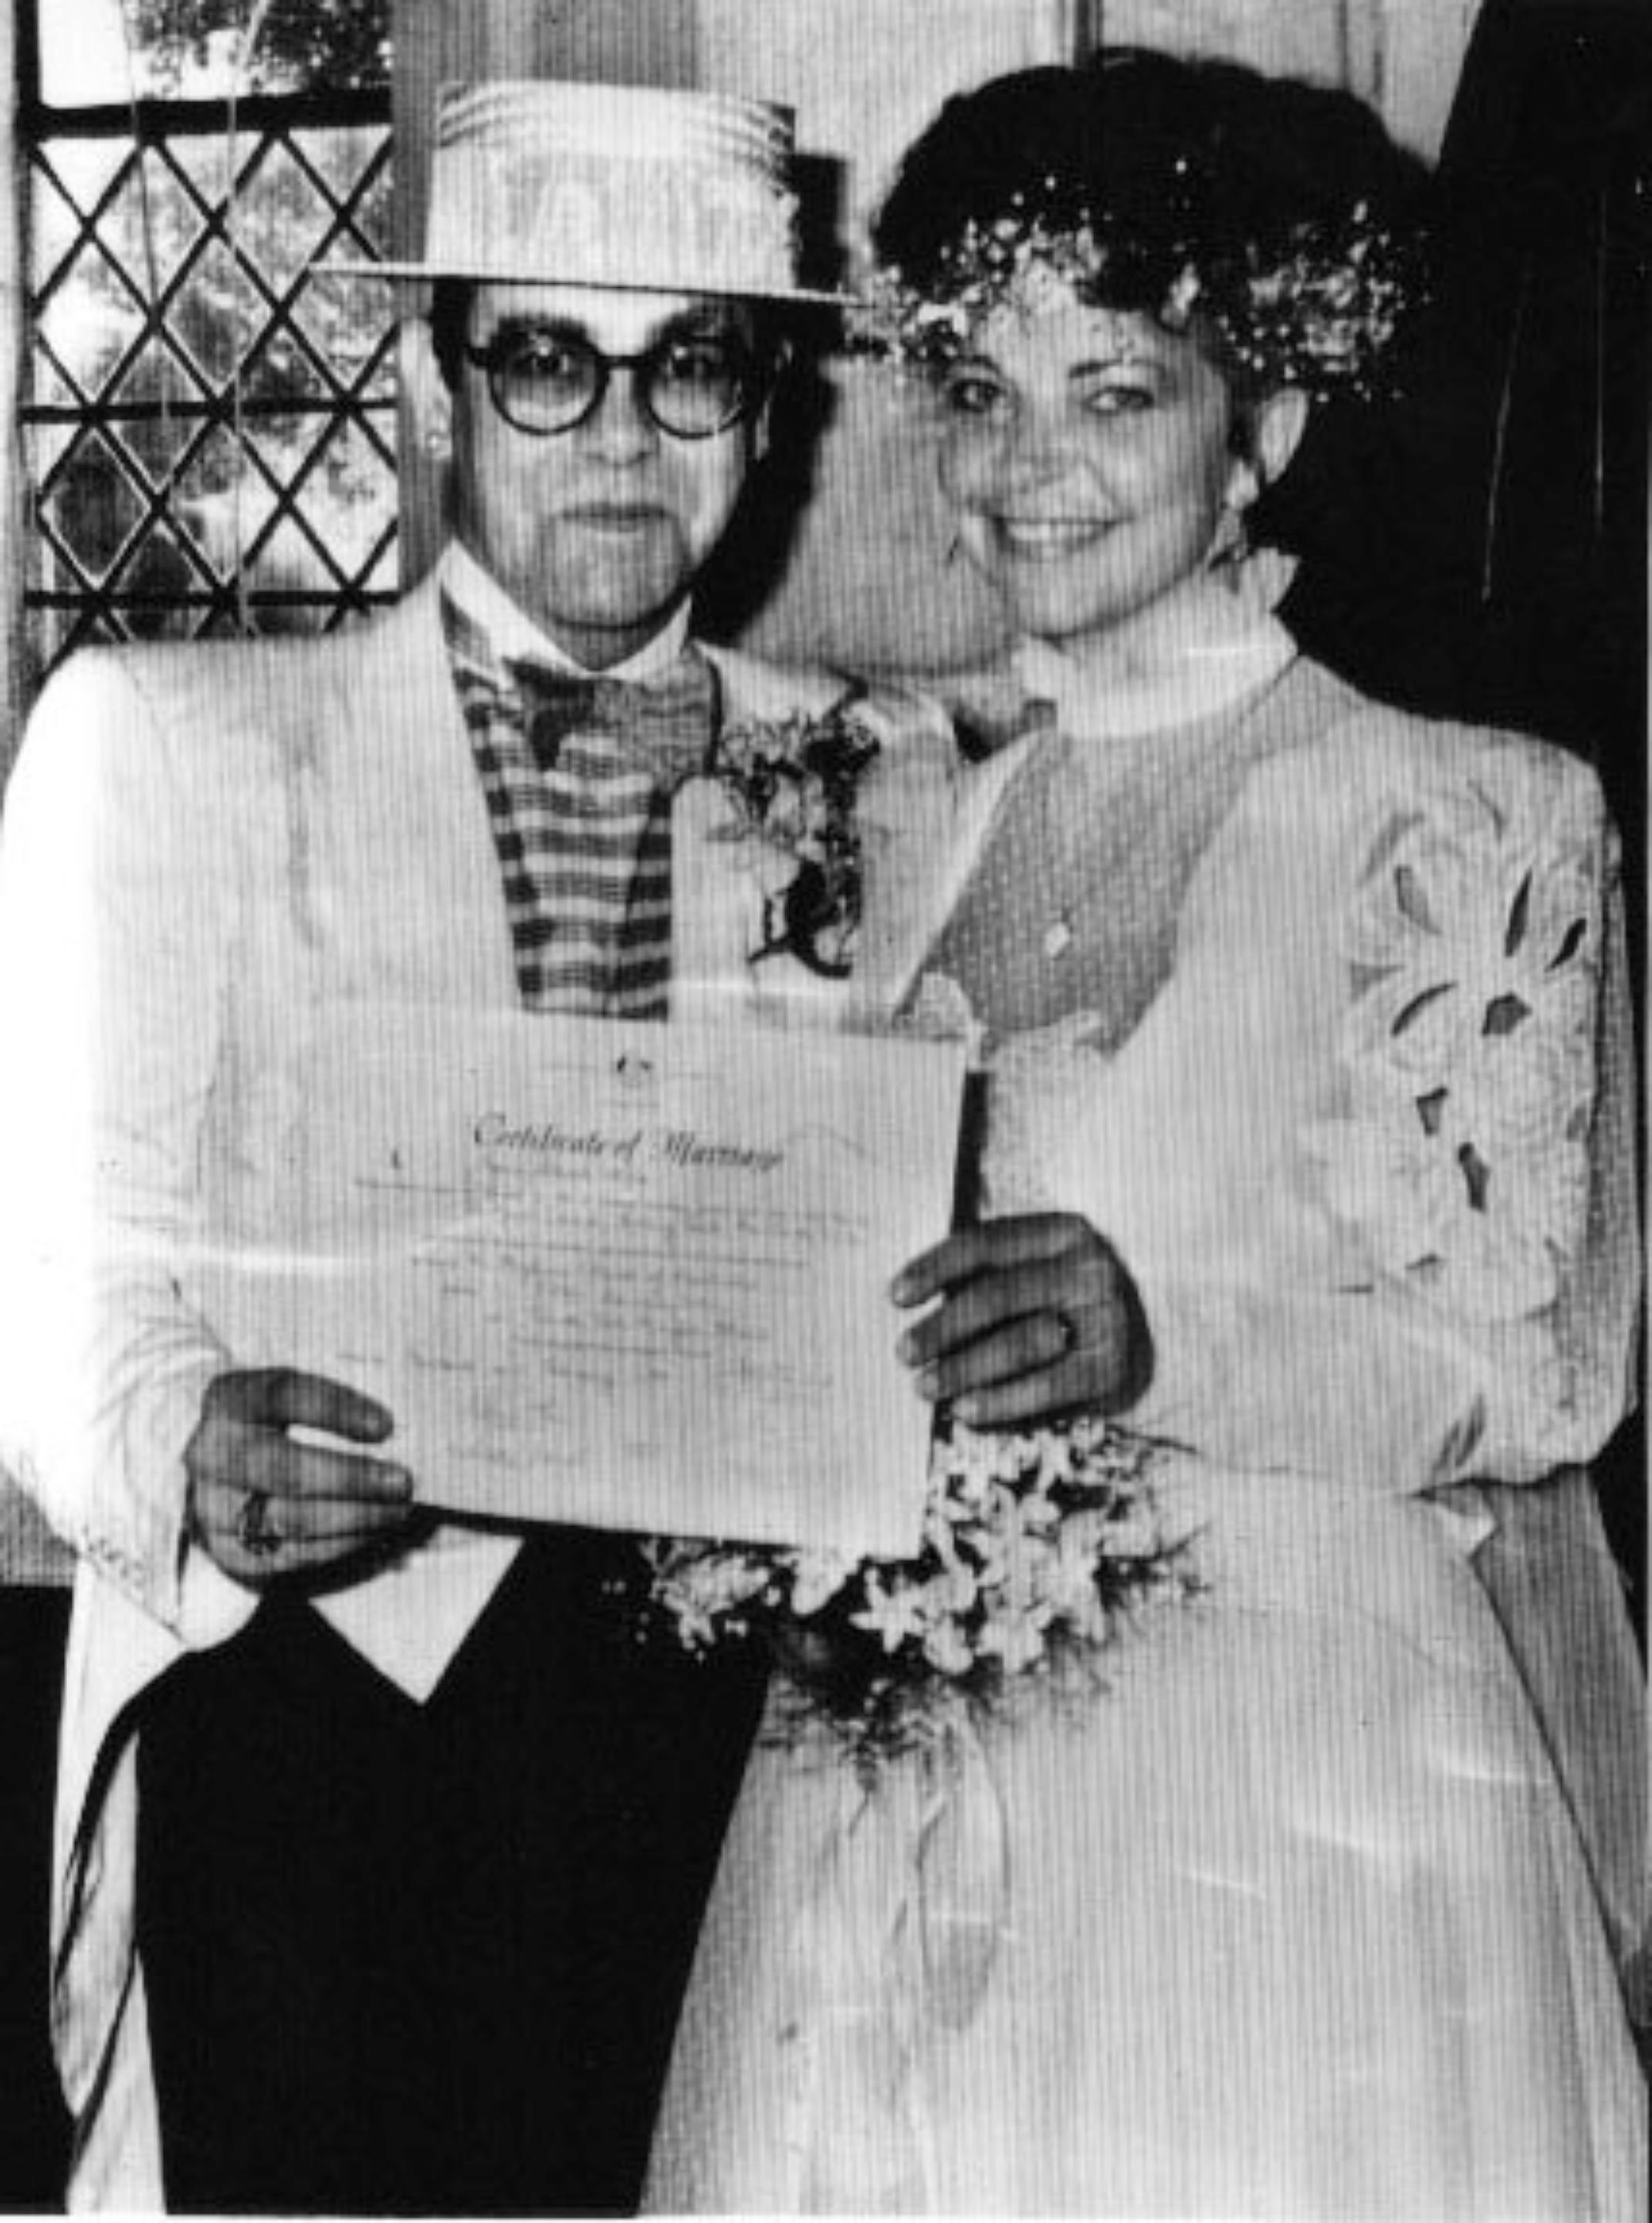 Unknown Figurative Photograph - Elton John's Certificate of Marriage 1984 - Vintage Photo - 1980s